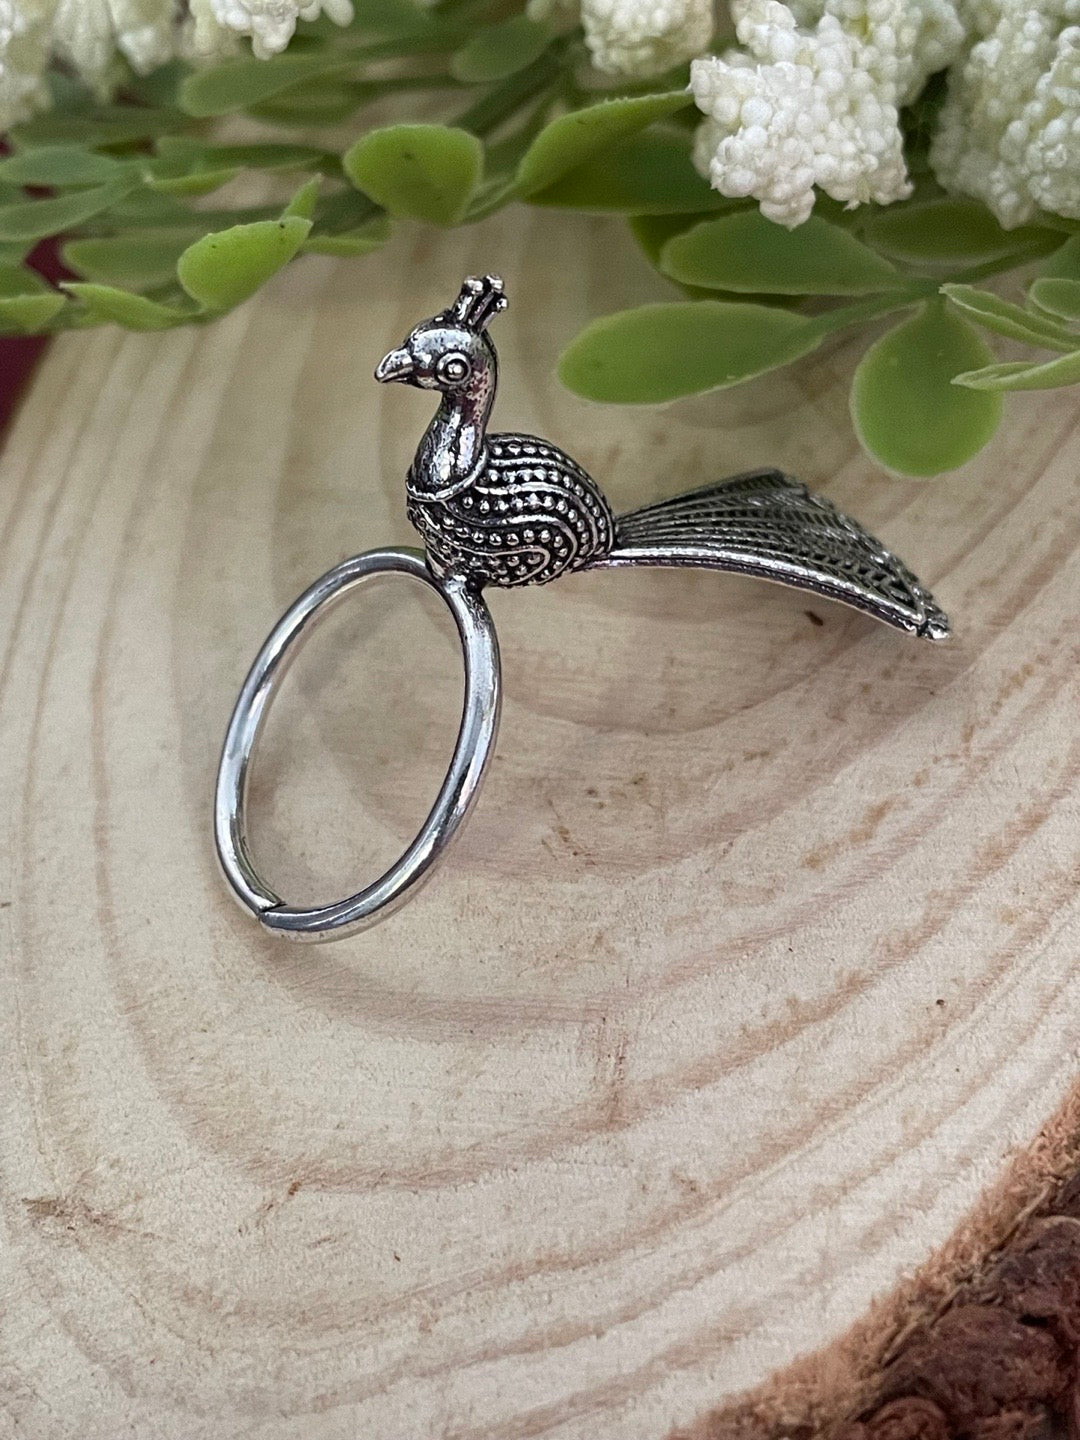 Buy Multi Stone Ring, Peacock Ring, Bird Ring, Sterling Silver Statement  Ring, Adjustable Ring , Jewelry Gift for Her, Peacock Jewelry Online in  India - Etsy